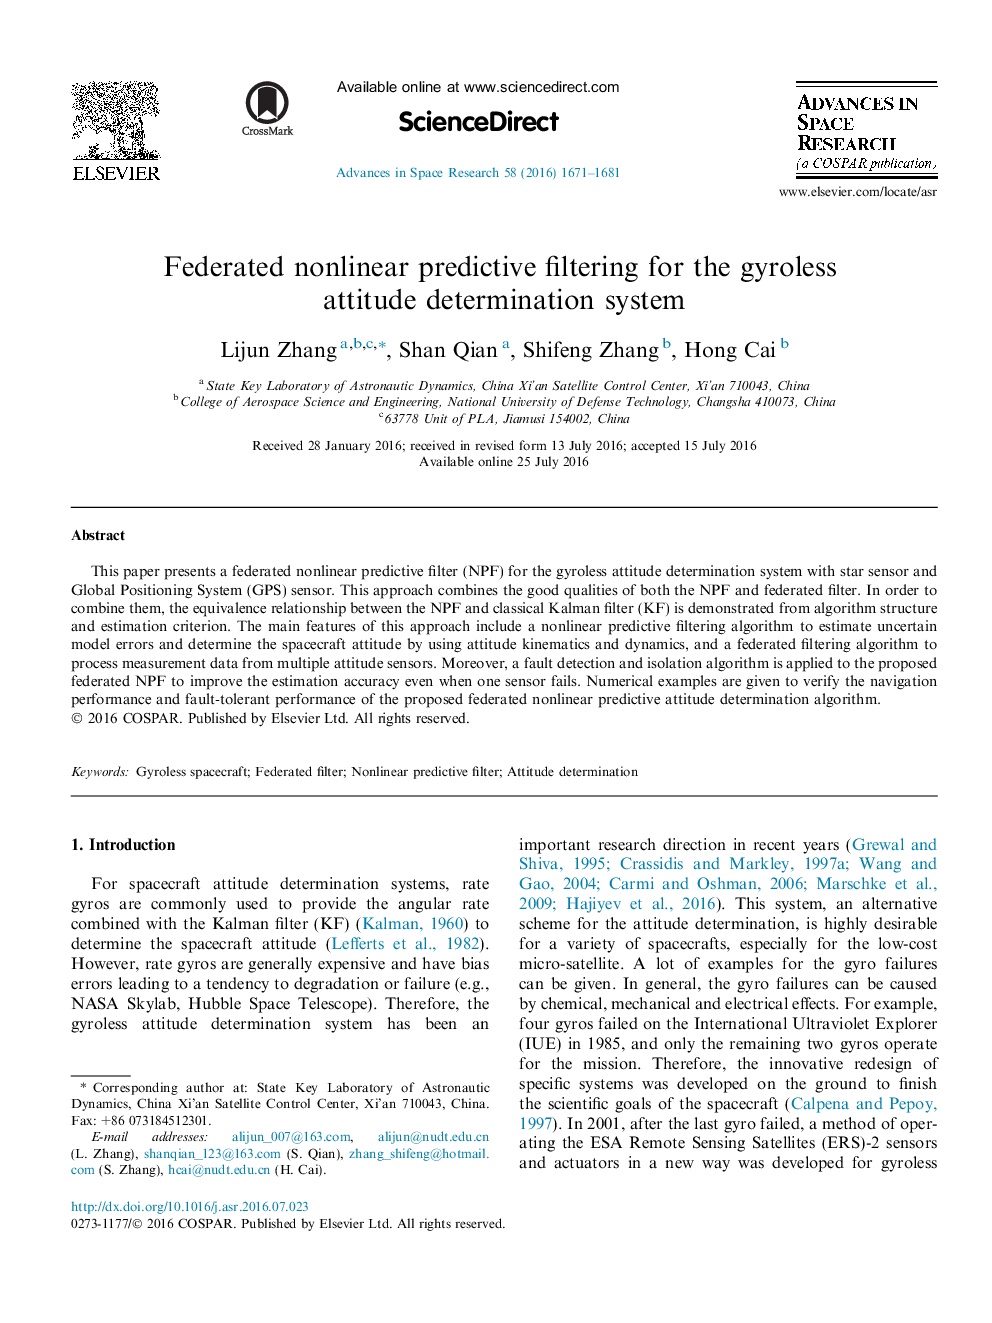 Federated nonlinear predictive filtering for the gyroless attitude determination system